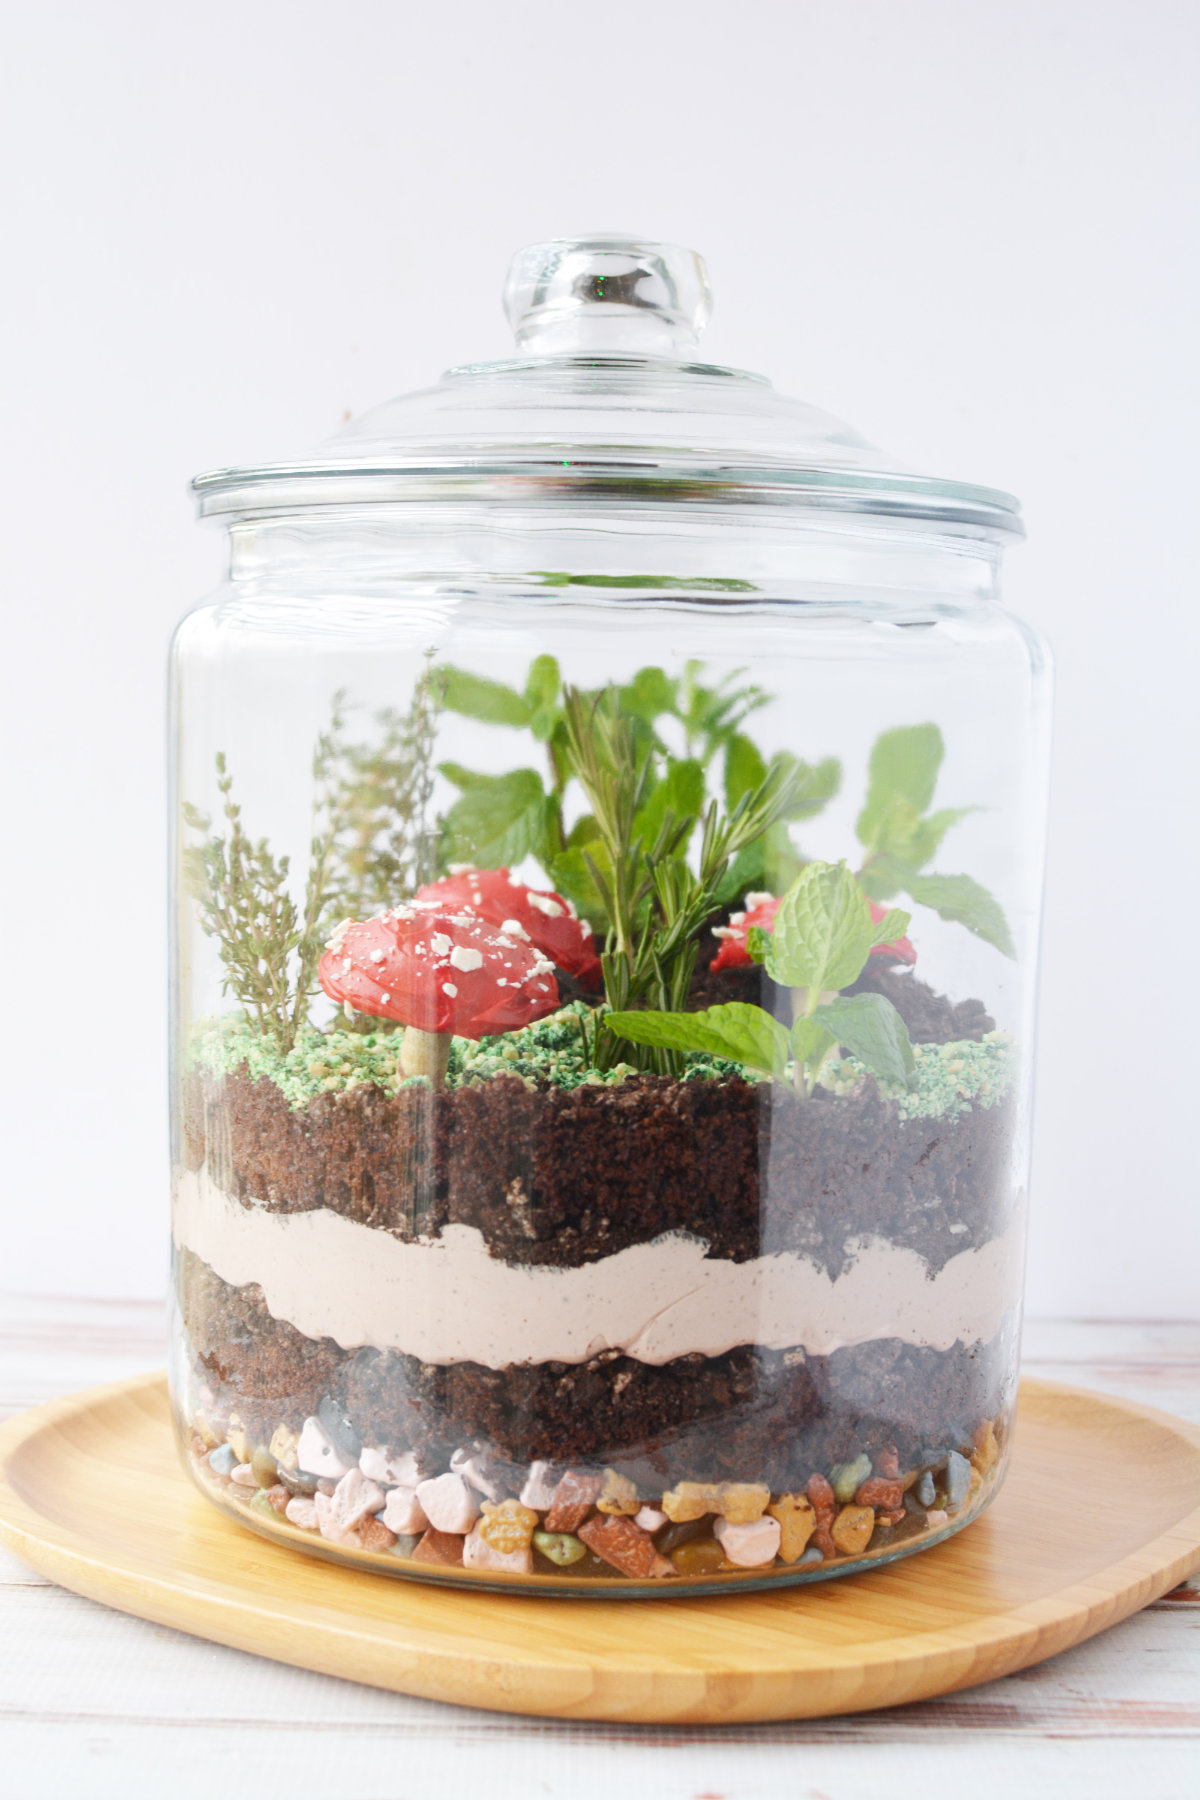 Edible terrarium with layers of whipped cream, cookies, and other candies to look like rocks.